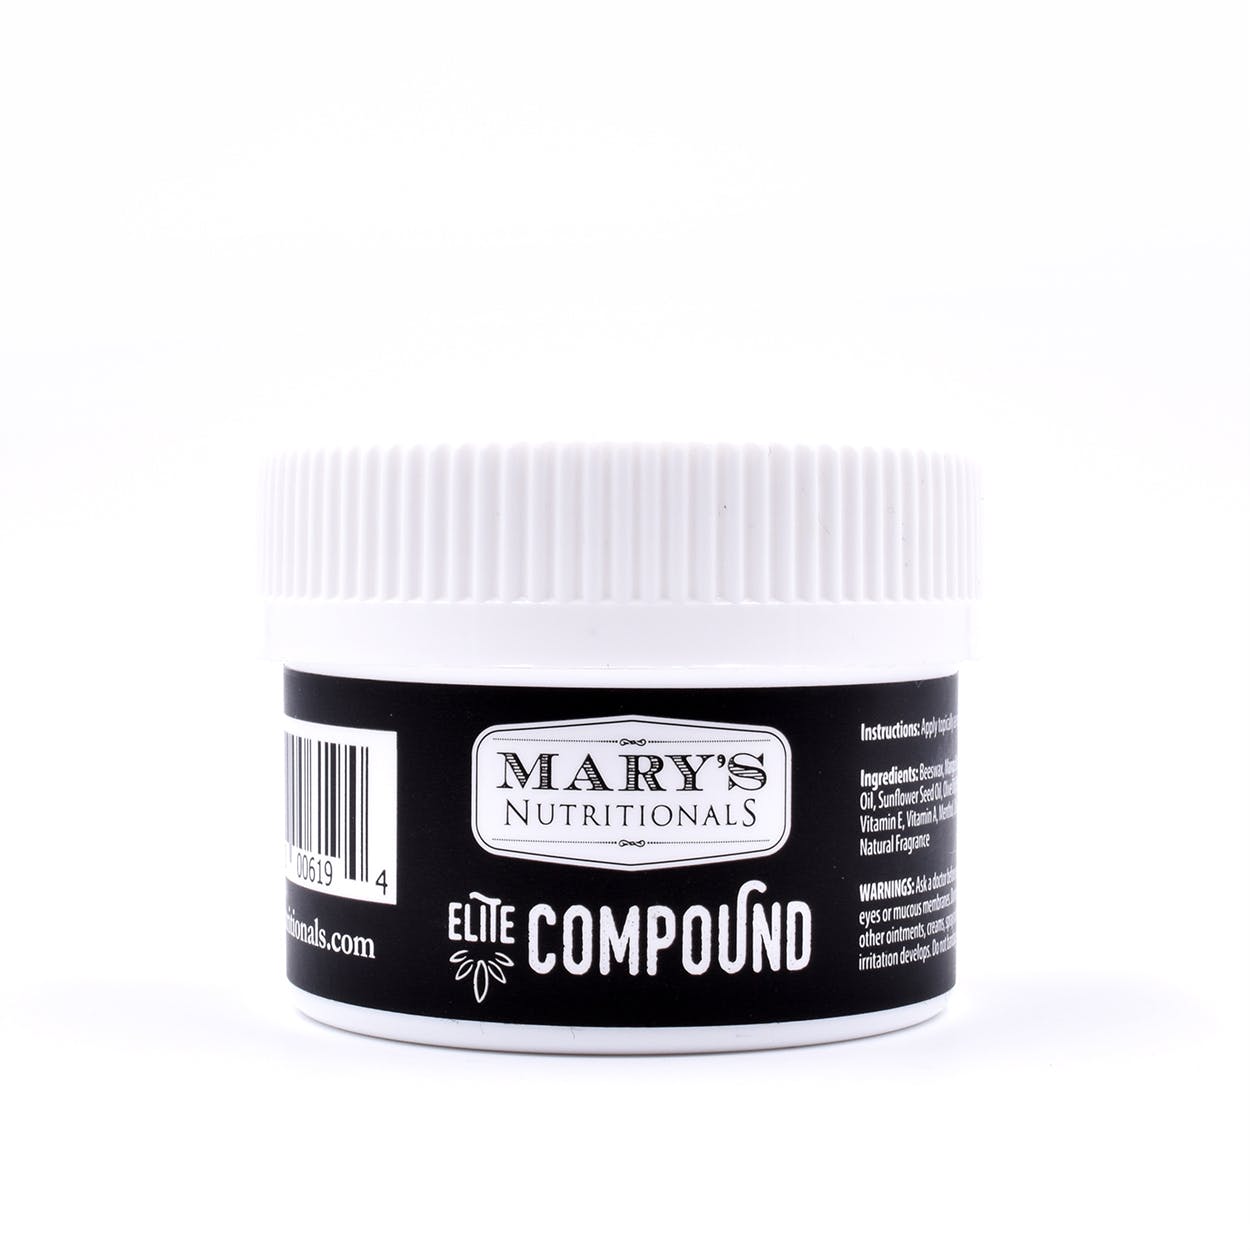 Mary's Nutritionals Elite Compound